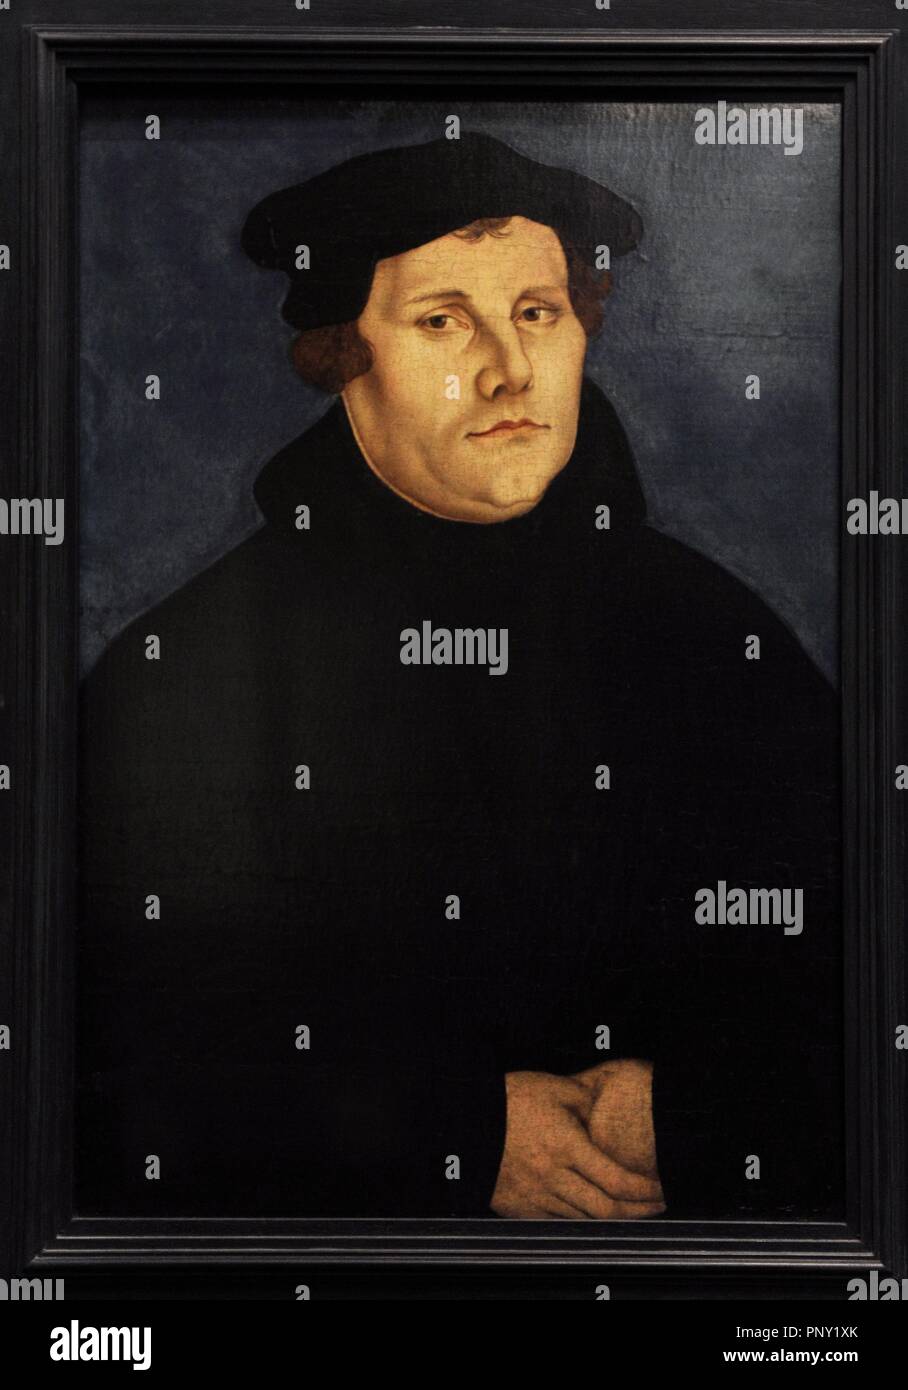 Martin Luther (1483-1546). German monk, icon of the Protestant Reformation. Portrait by Lucas Cranach the Elder (1472-1553), 1529. German Historical Museum. Berlin. Germany. Stock Photo